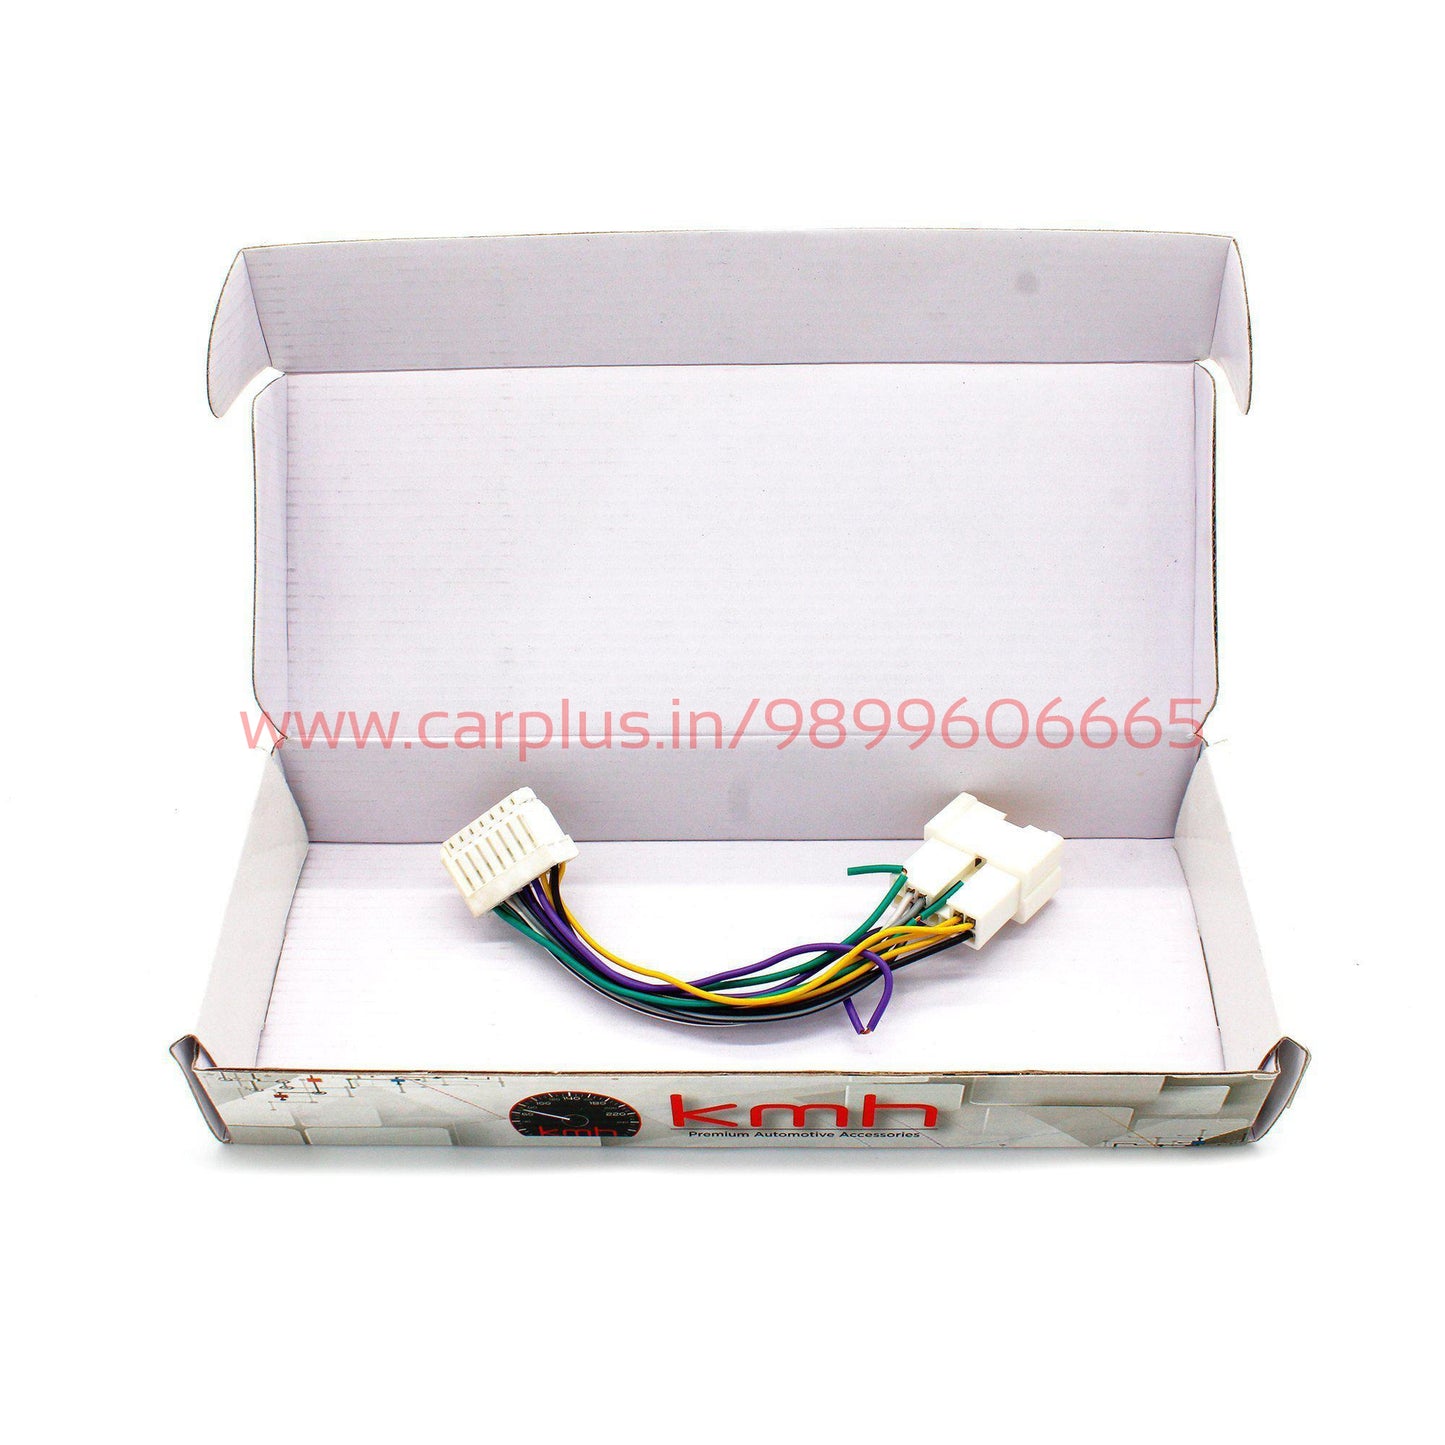 
                  
                    KMH Male Female Wiring Harness For Renault Duster-HI-LOW CONVERTER-KMH-HI-LOW CONVERTOR HARNESS-CARPLUS
                  
                